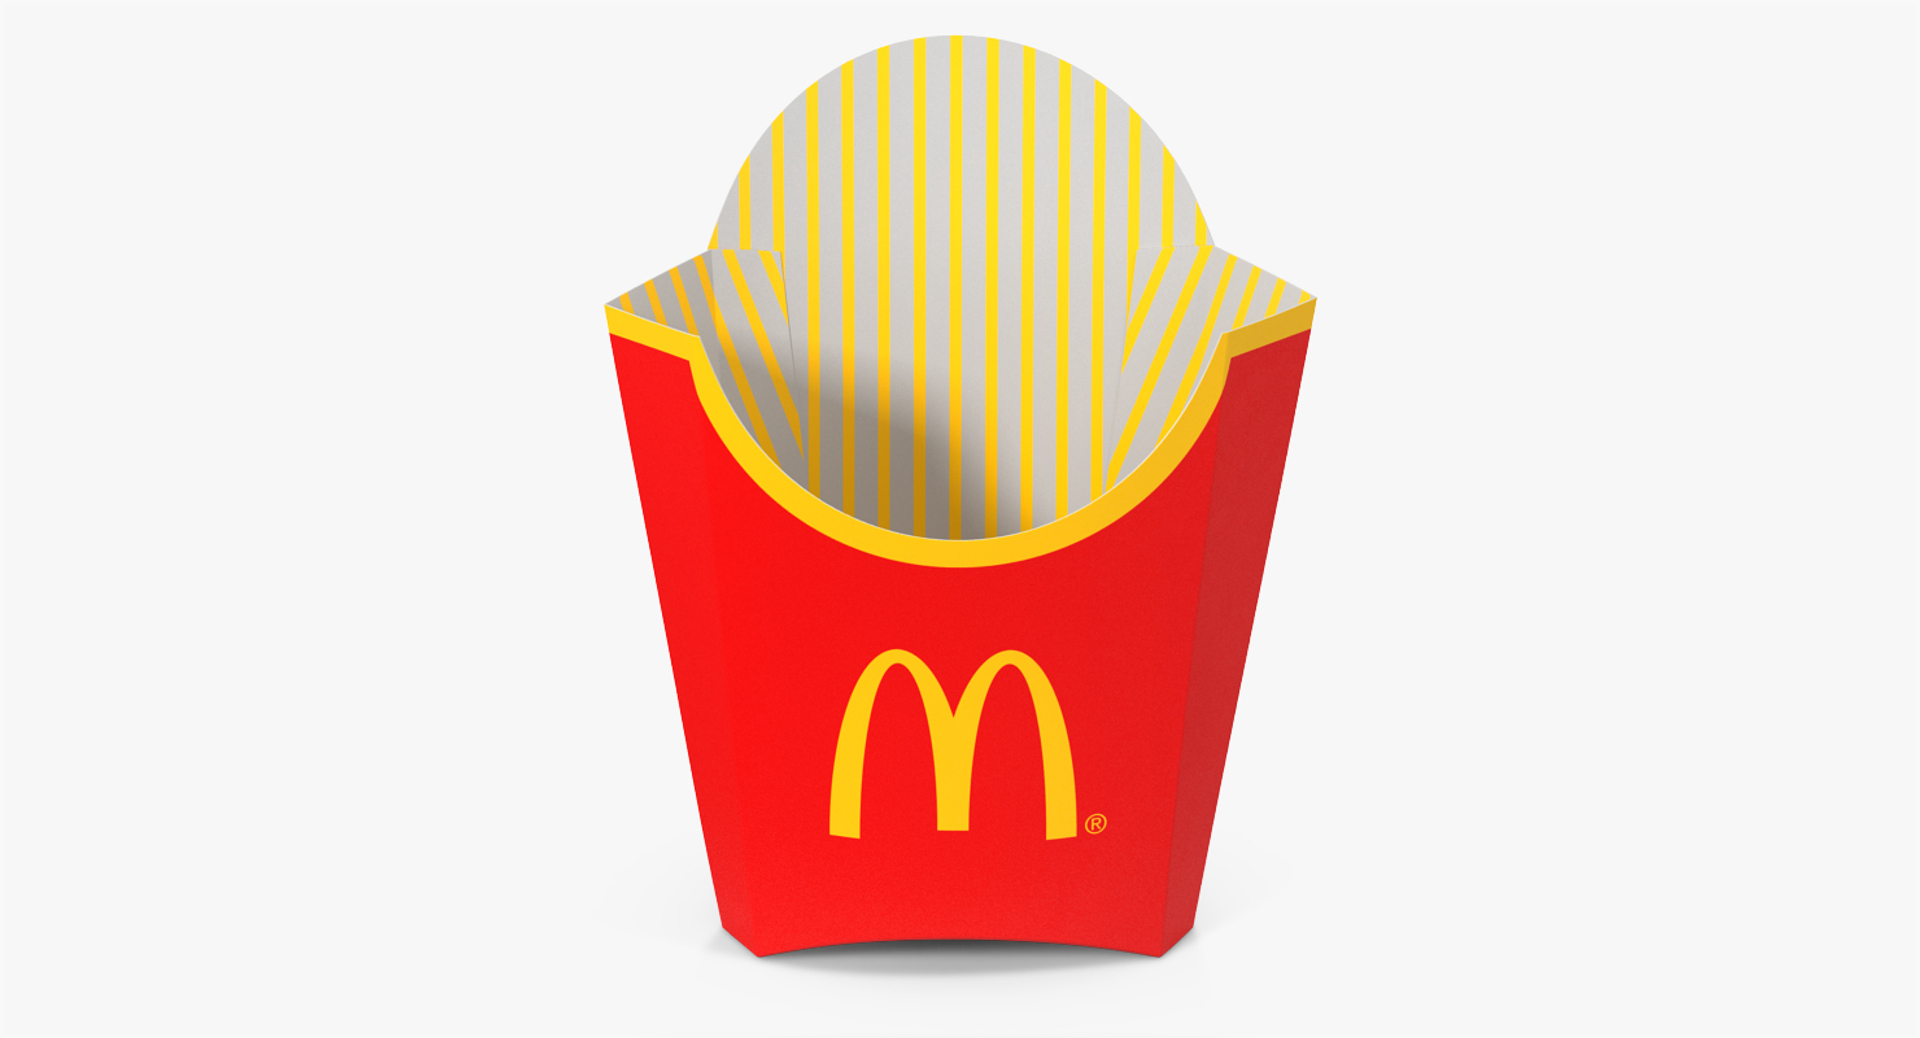 McDonald's French Fries Holder For Your Car